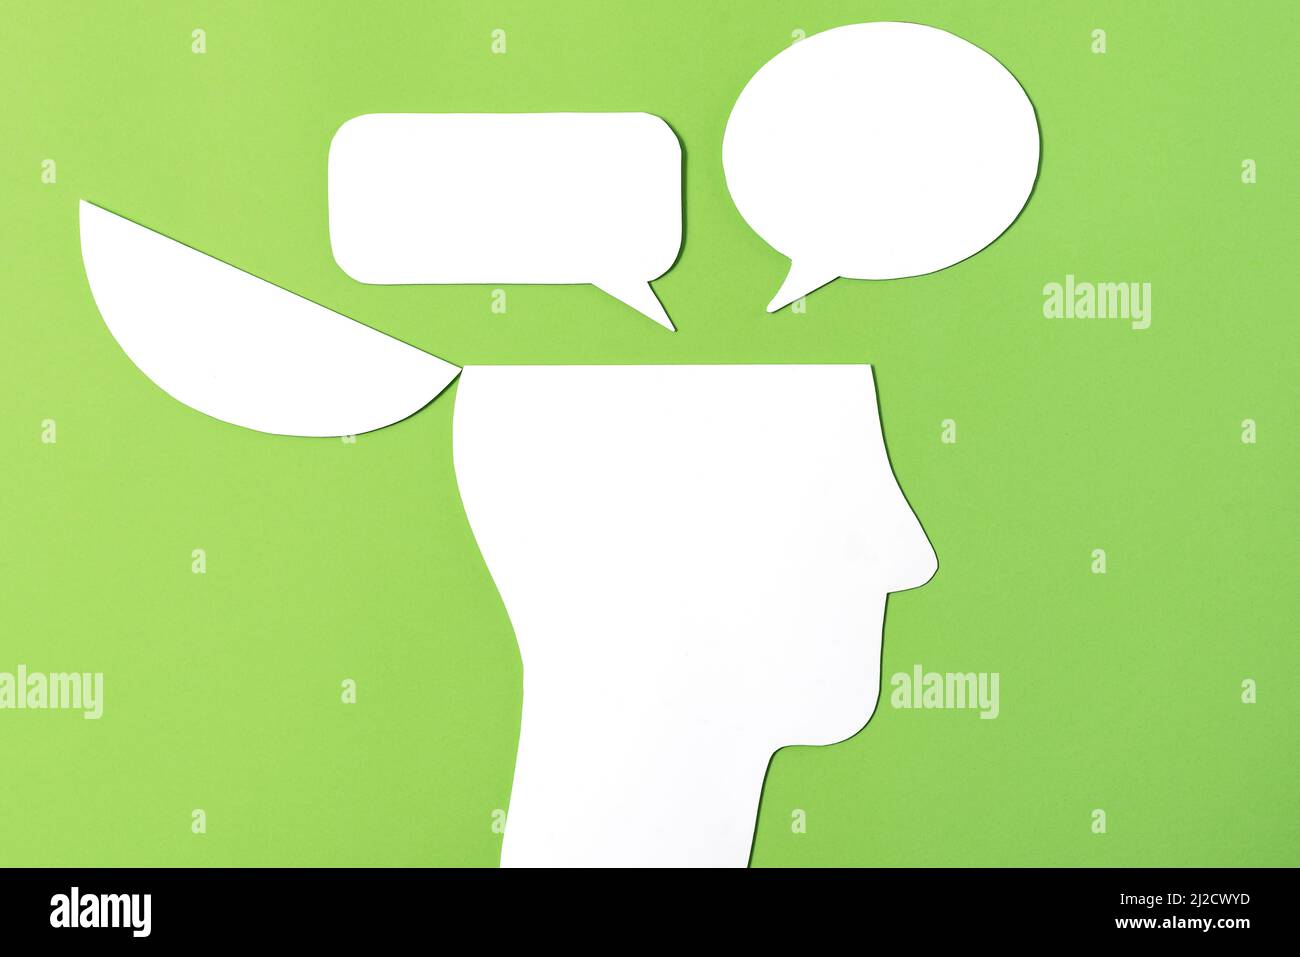 Inner Conflict Concept, Paper Cut out Open head with two speech bubbles Stock Photo